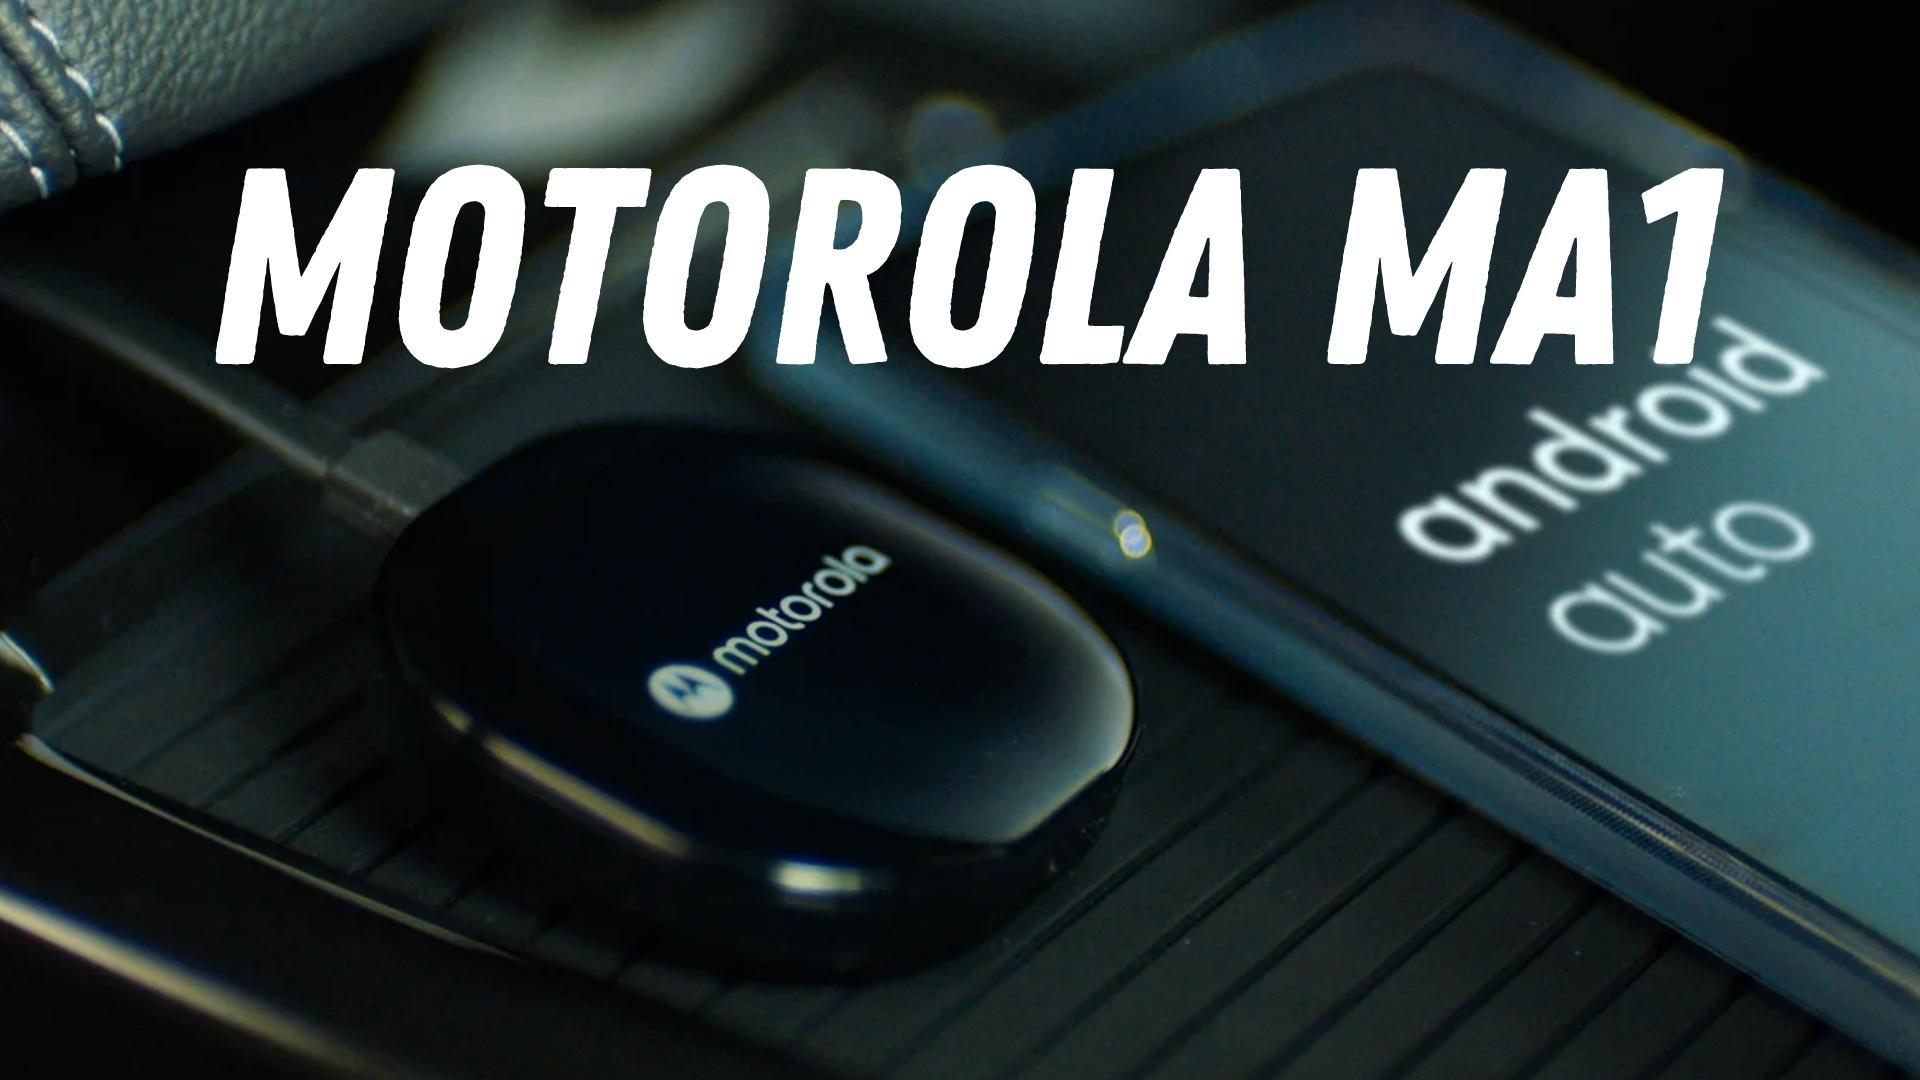 https://true-tech.net/wp-content/uploads/2022/01/Motorola-MA1-USB-dongle-brings-Android-Auto-to-any-car.jpg